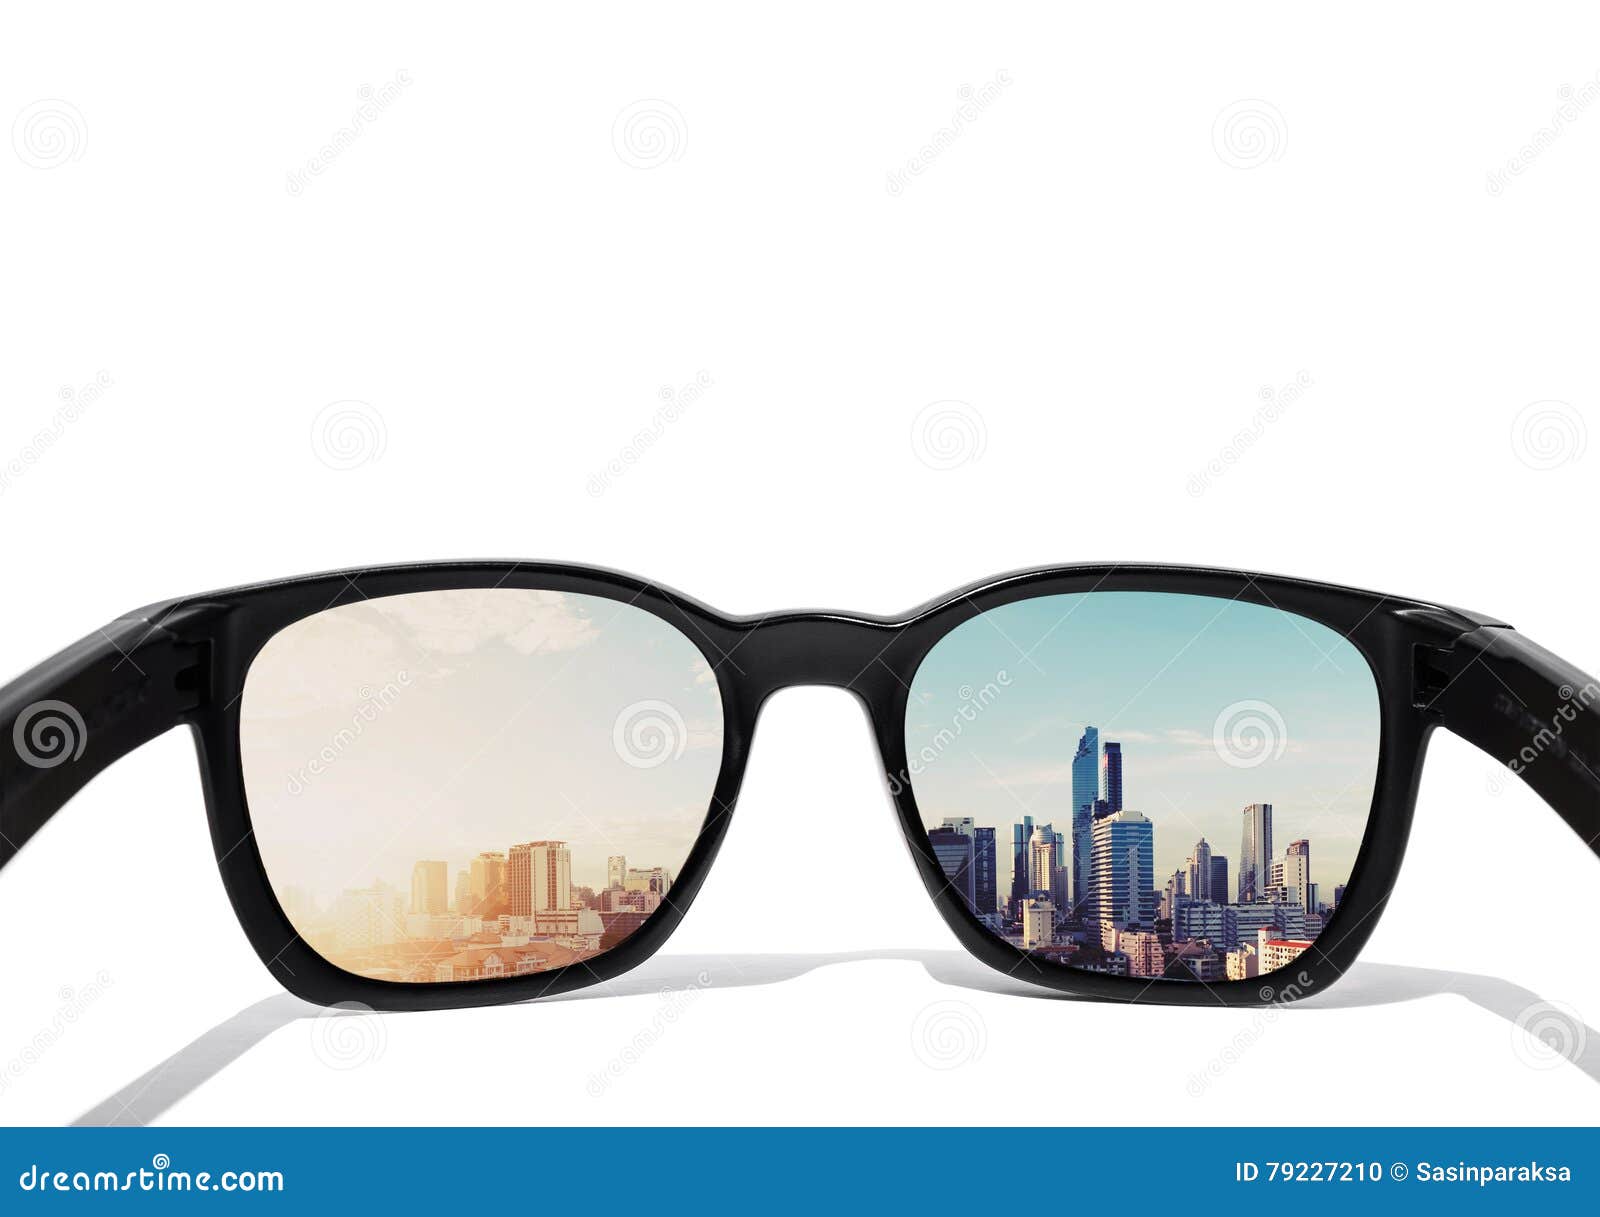 eye glasses looking to city view, focused on glasses lens